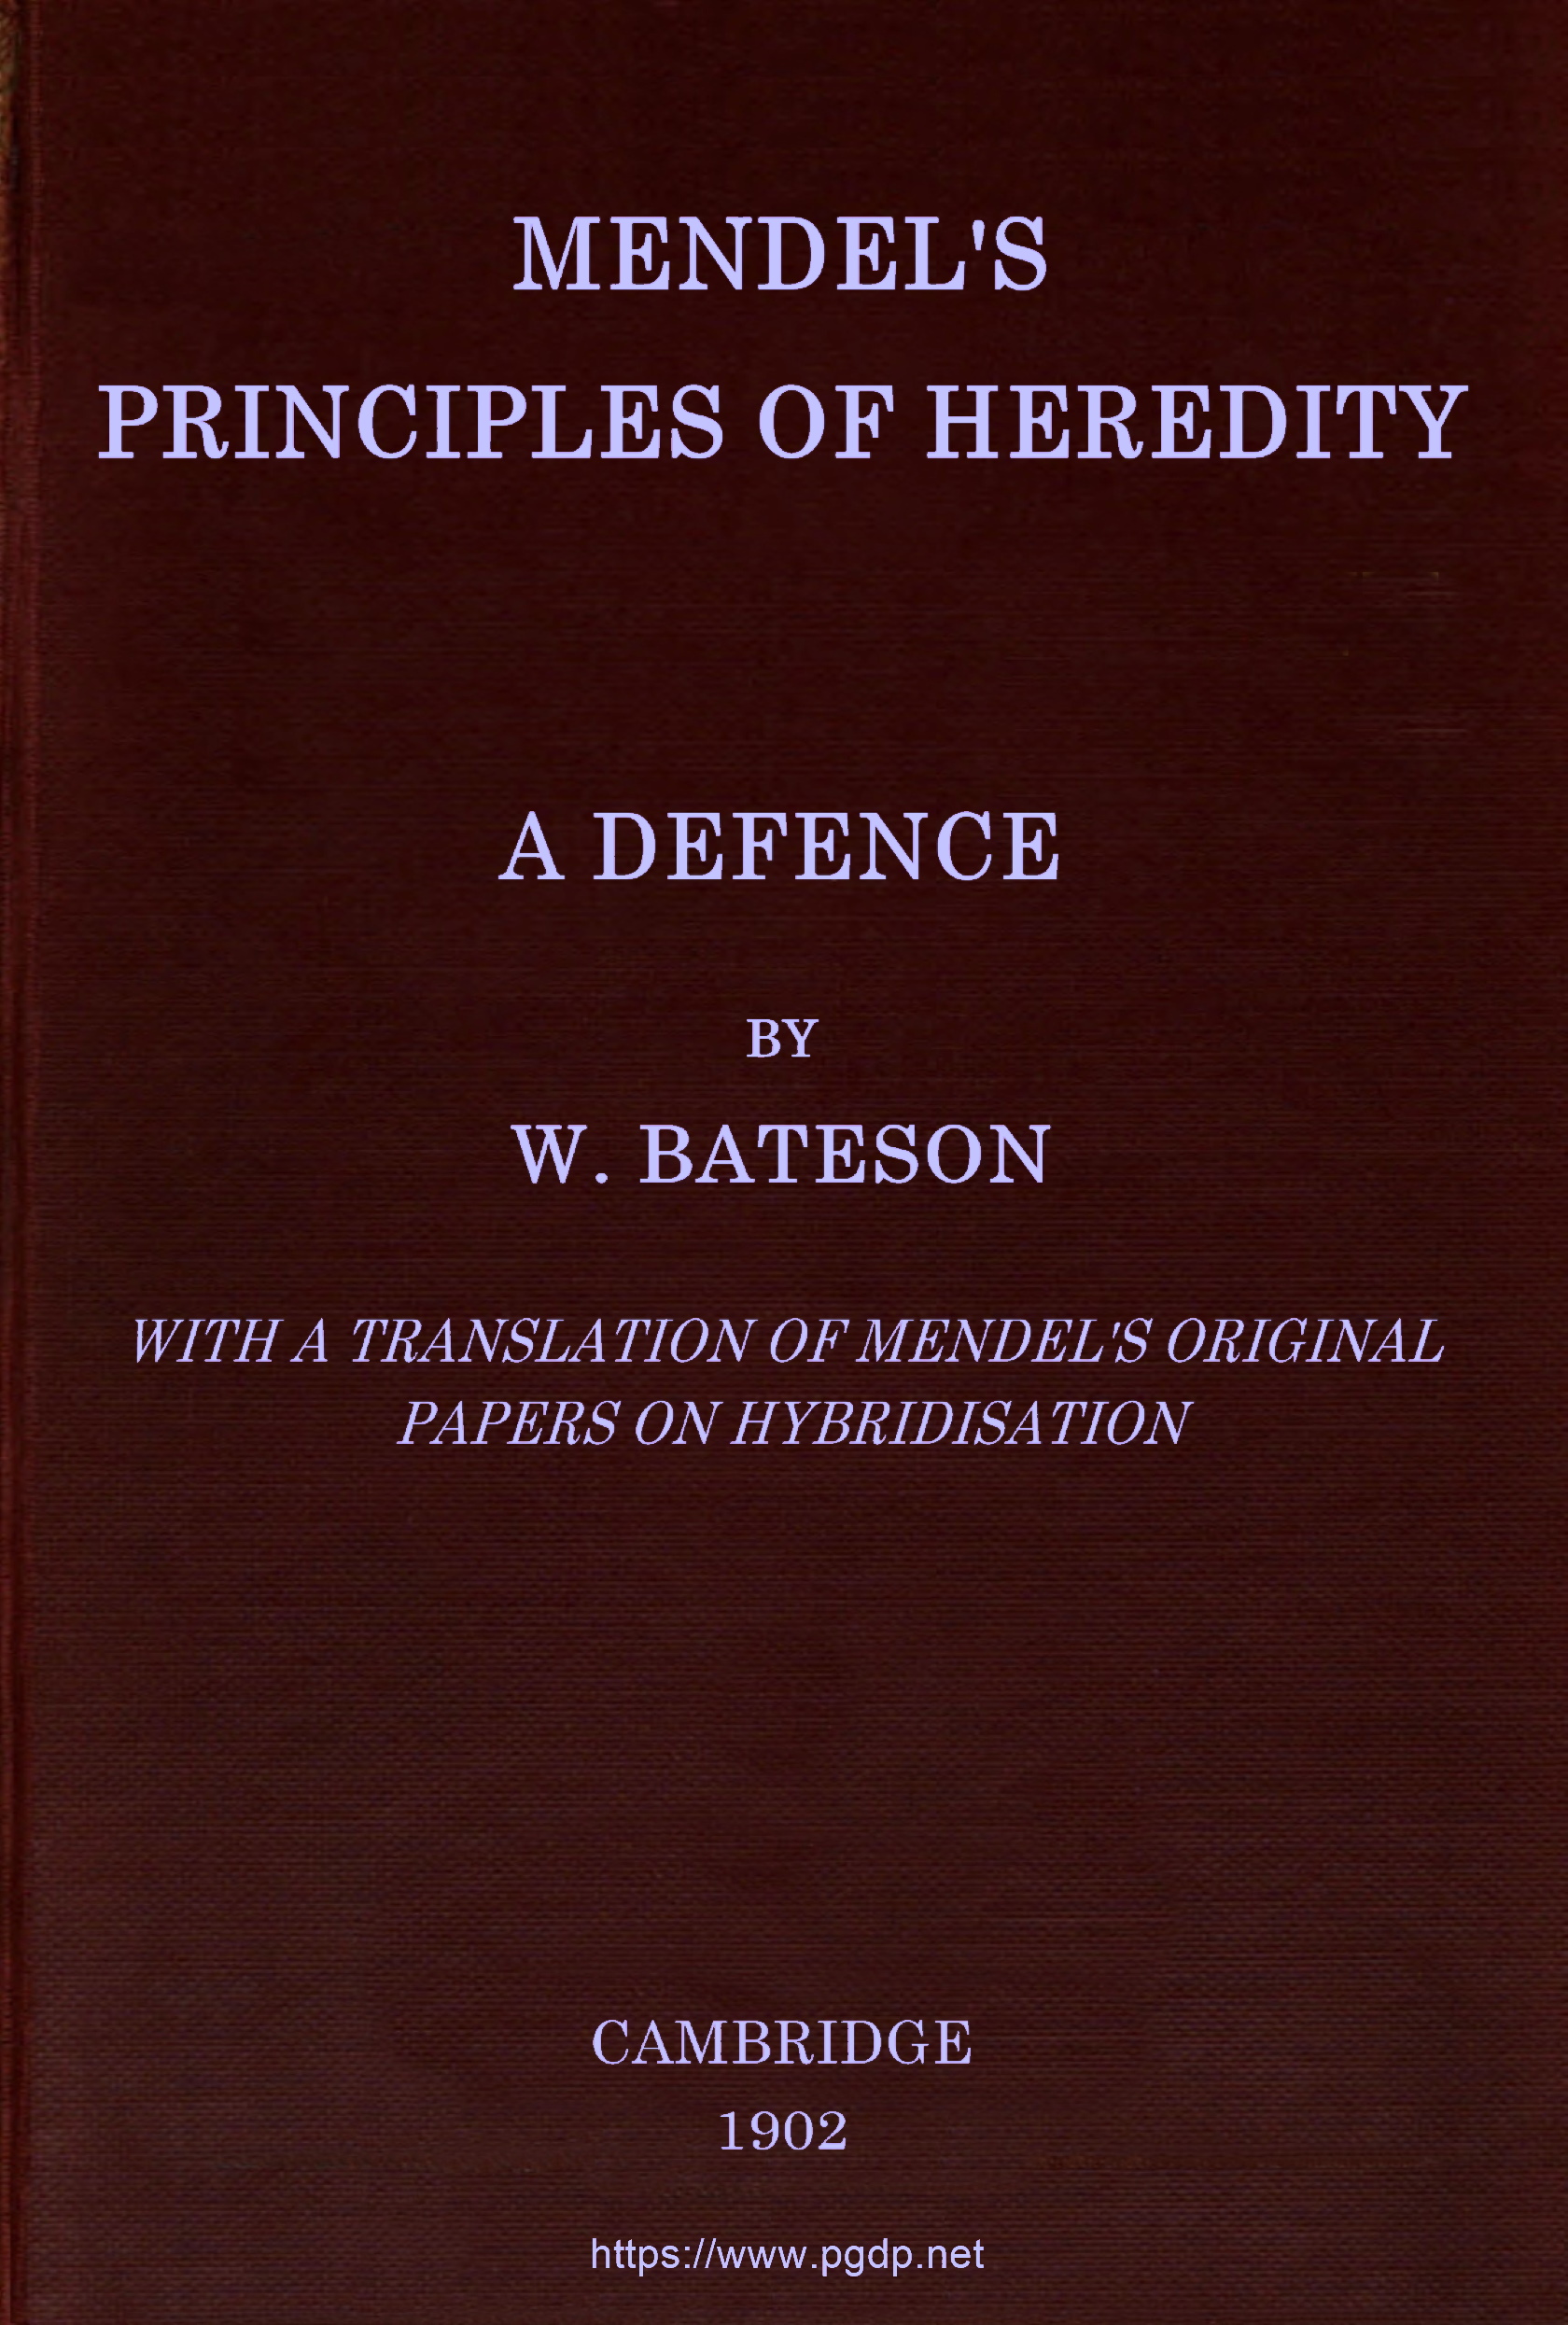 Mendel's principles of heredity: A defence